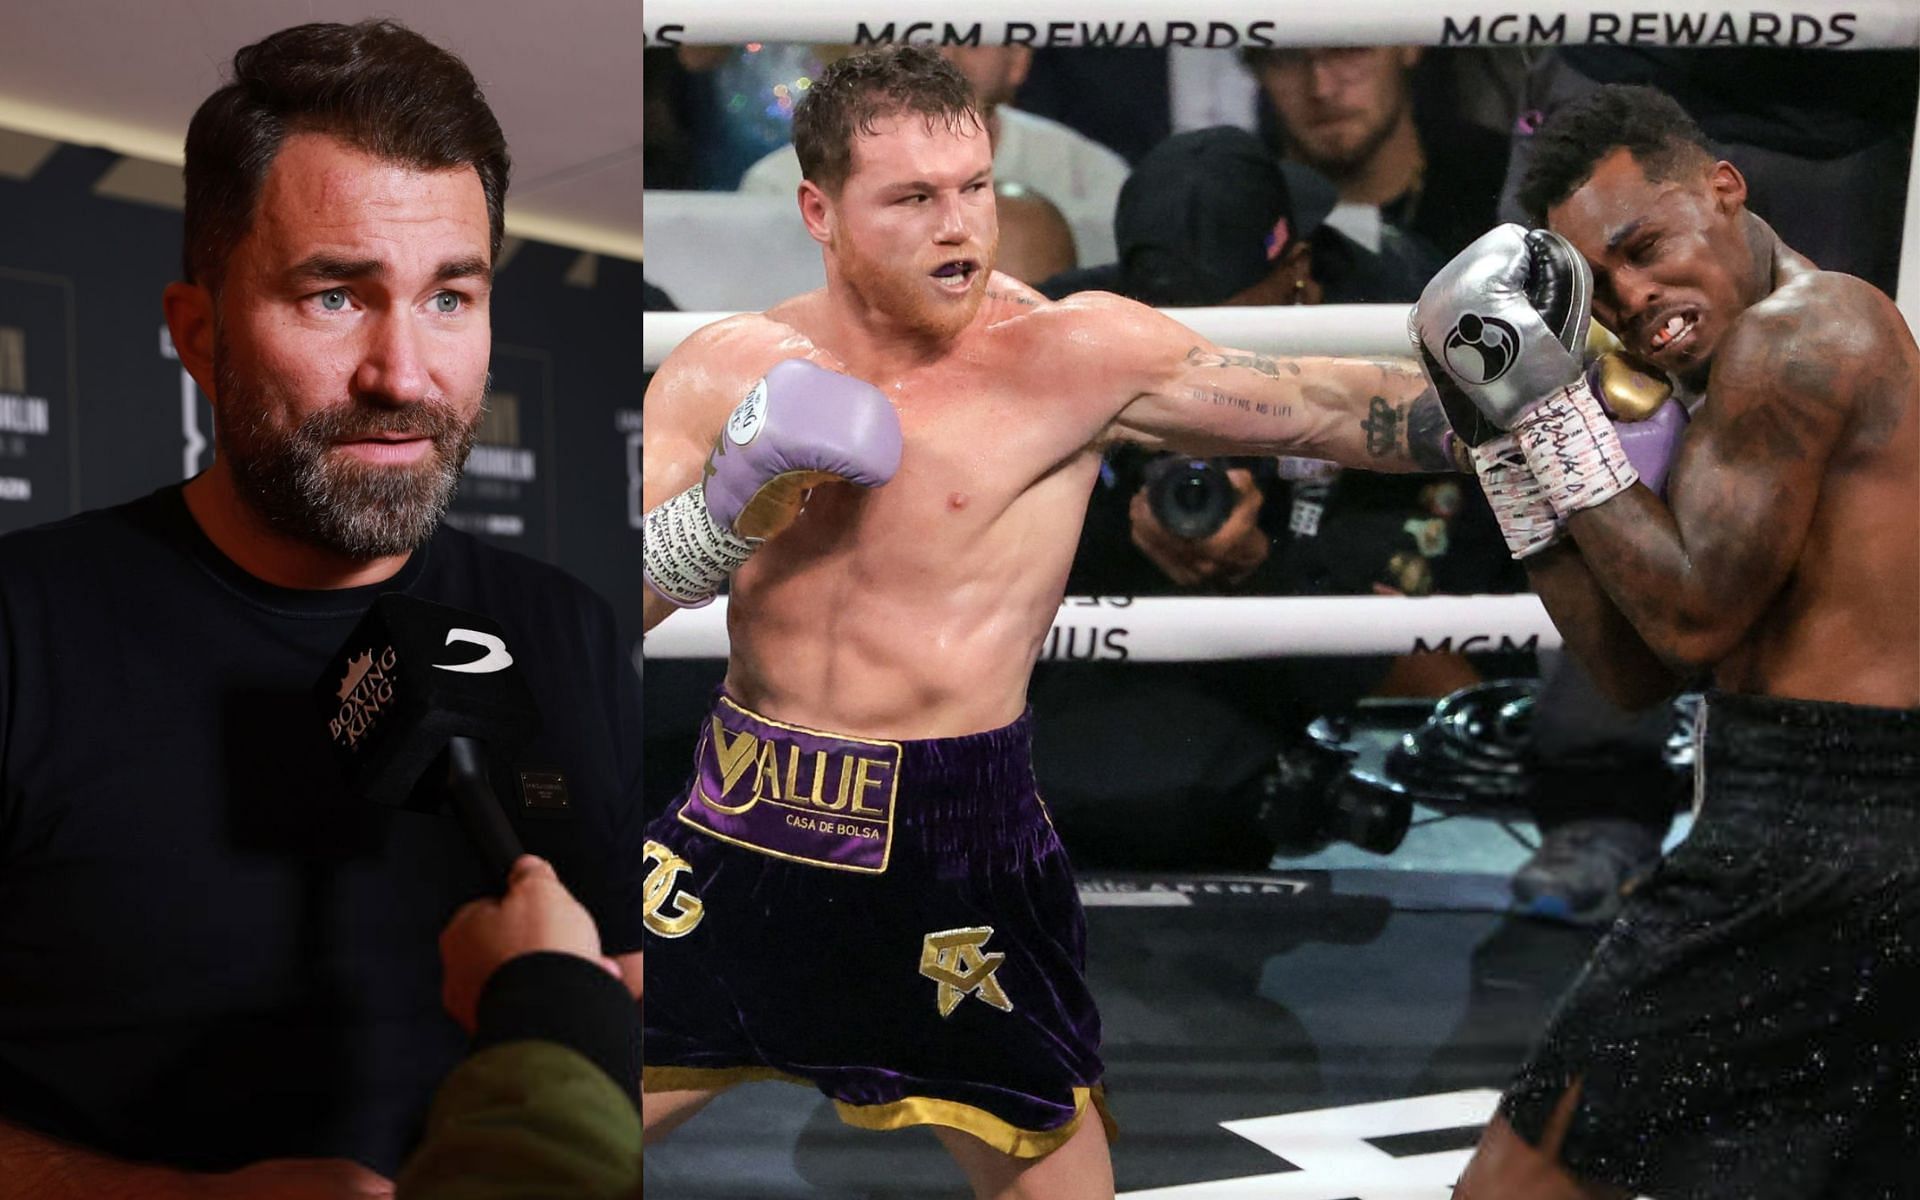 Eddie Hearn (left) and Canelo Alvarez vs. Jermell Charlo (right) [Images Courtesy: @GettyImages]